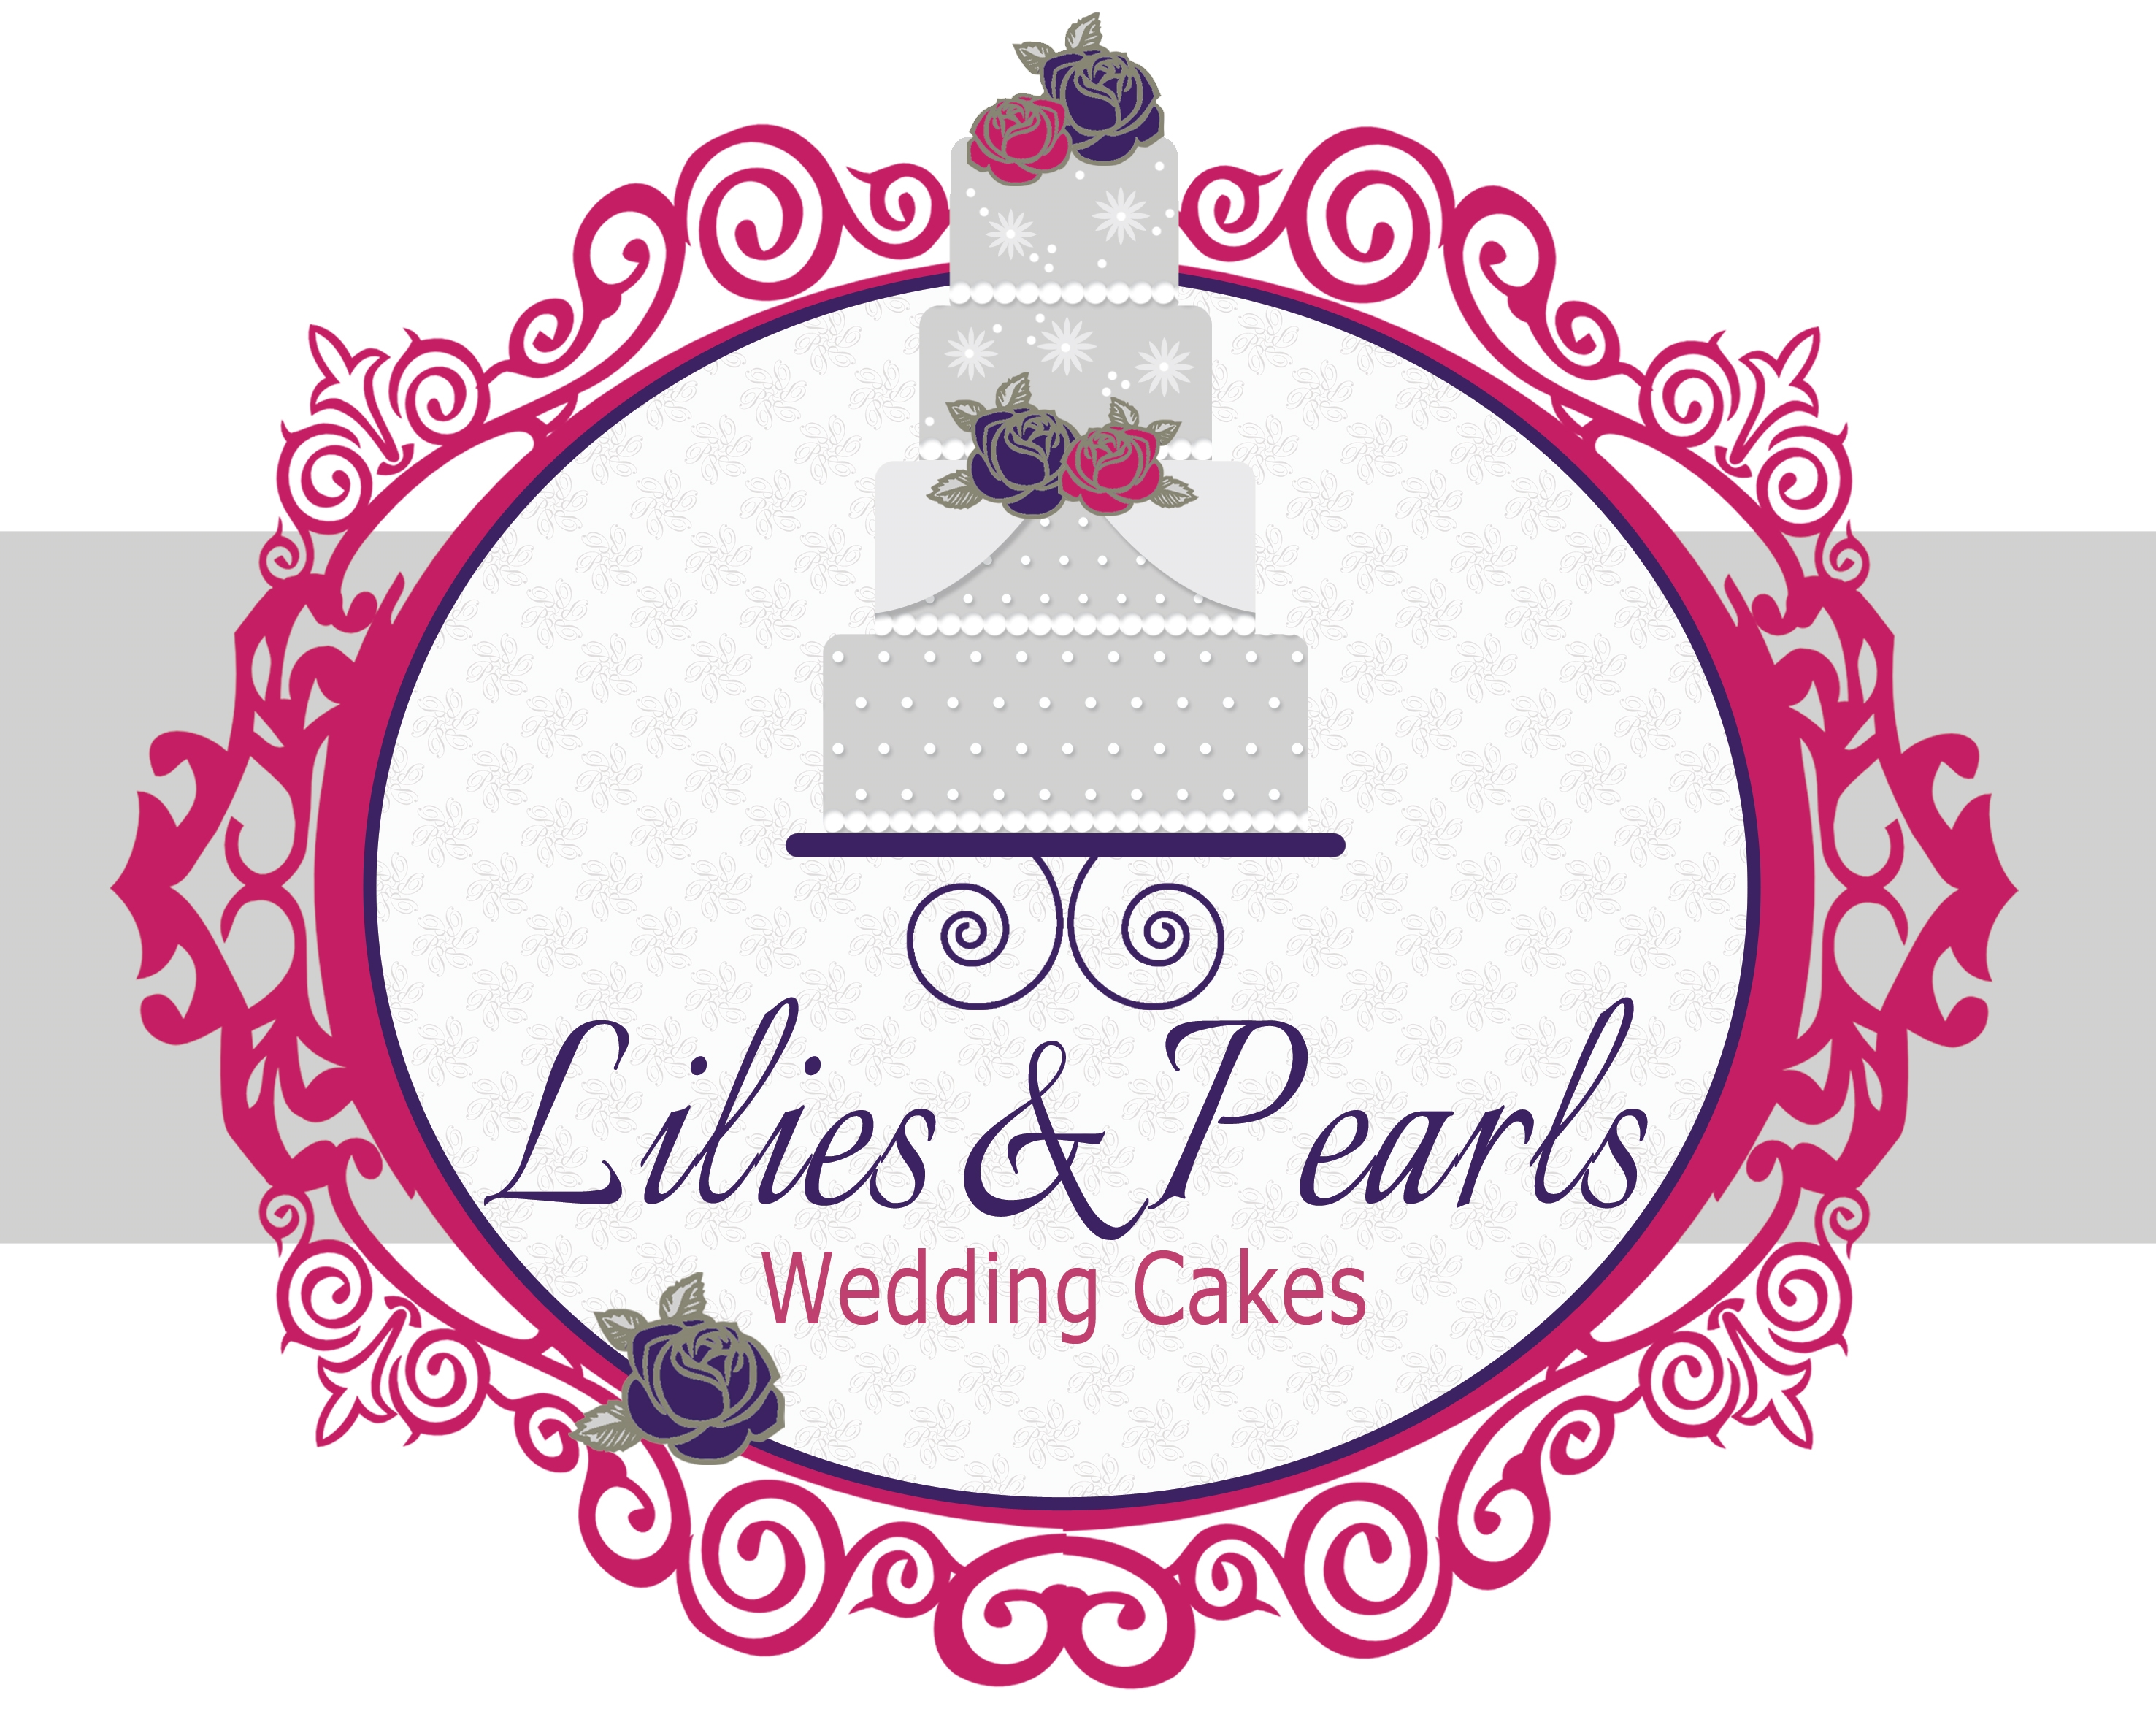 Lilies & Pearls Wedding Cakes 